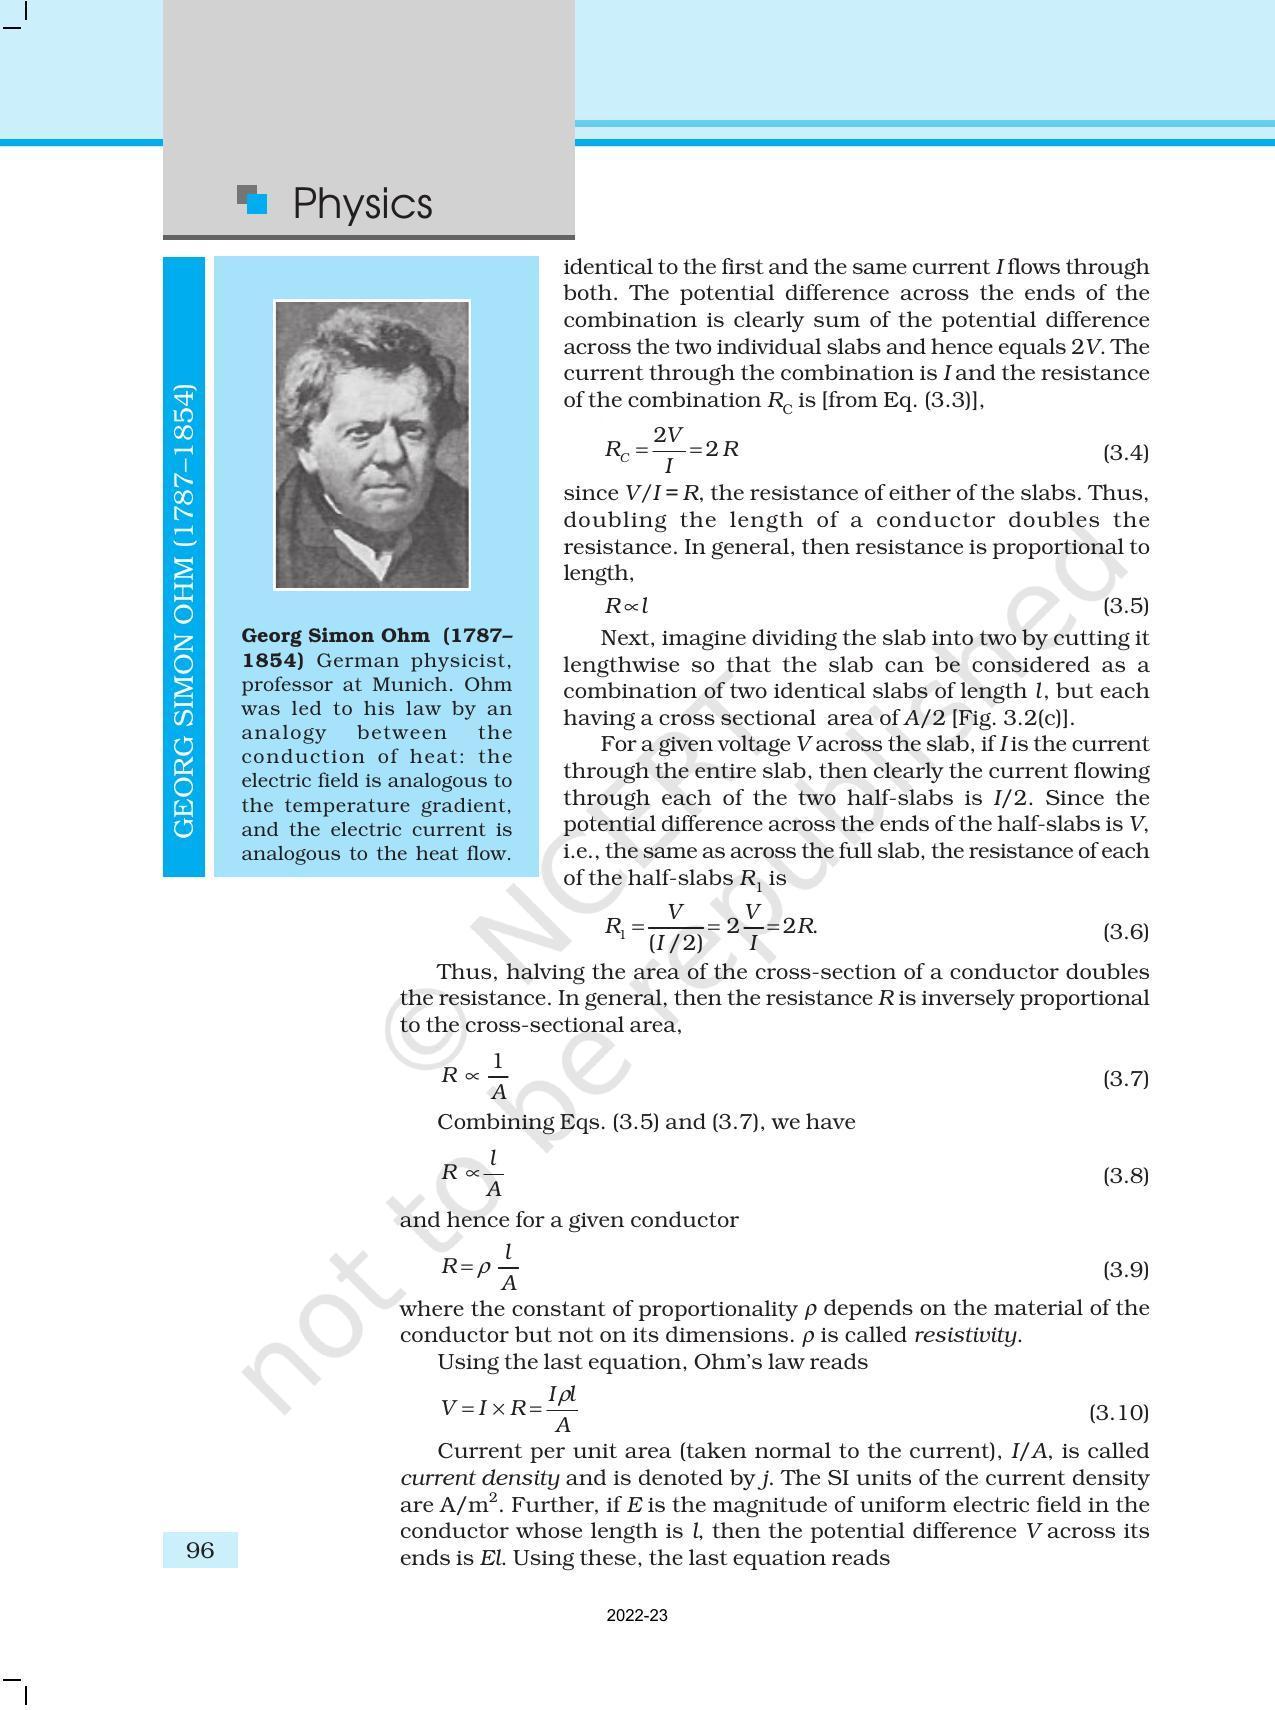 NCERT Book for Class 12 Physics Chapter 3 Current Electricity - Page 4